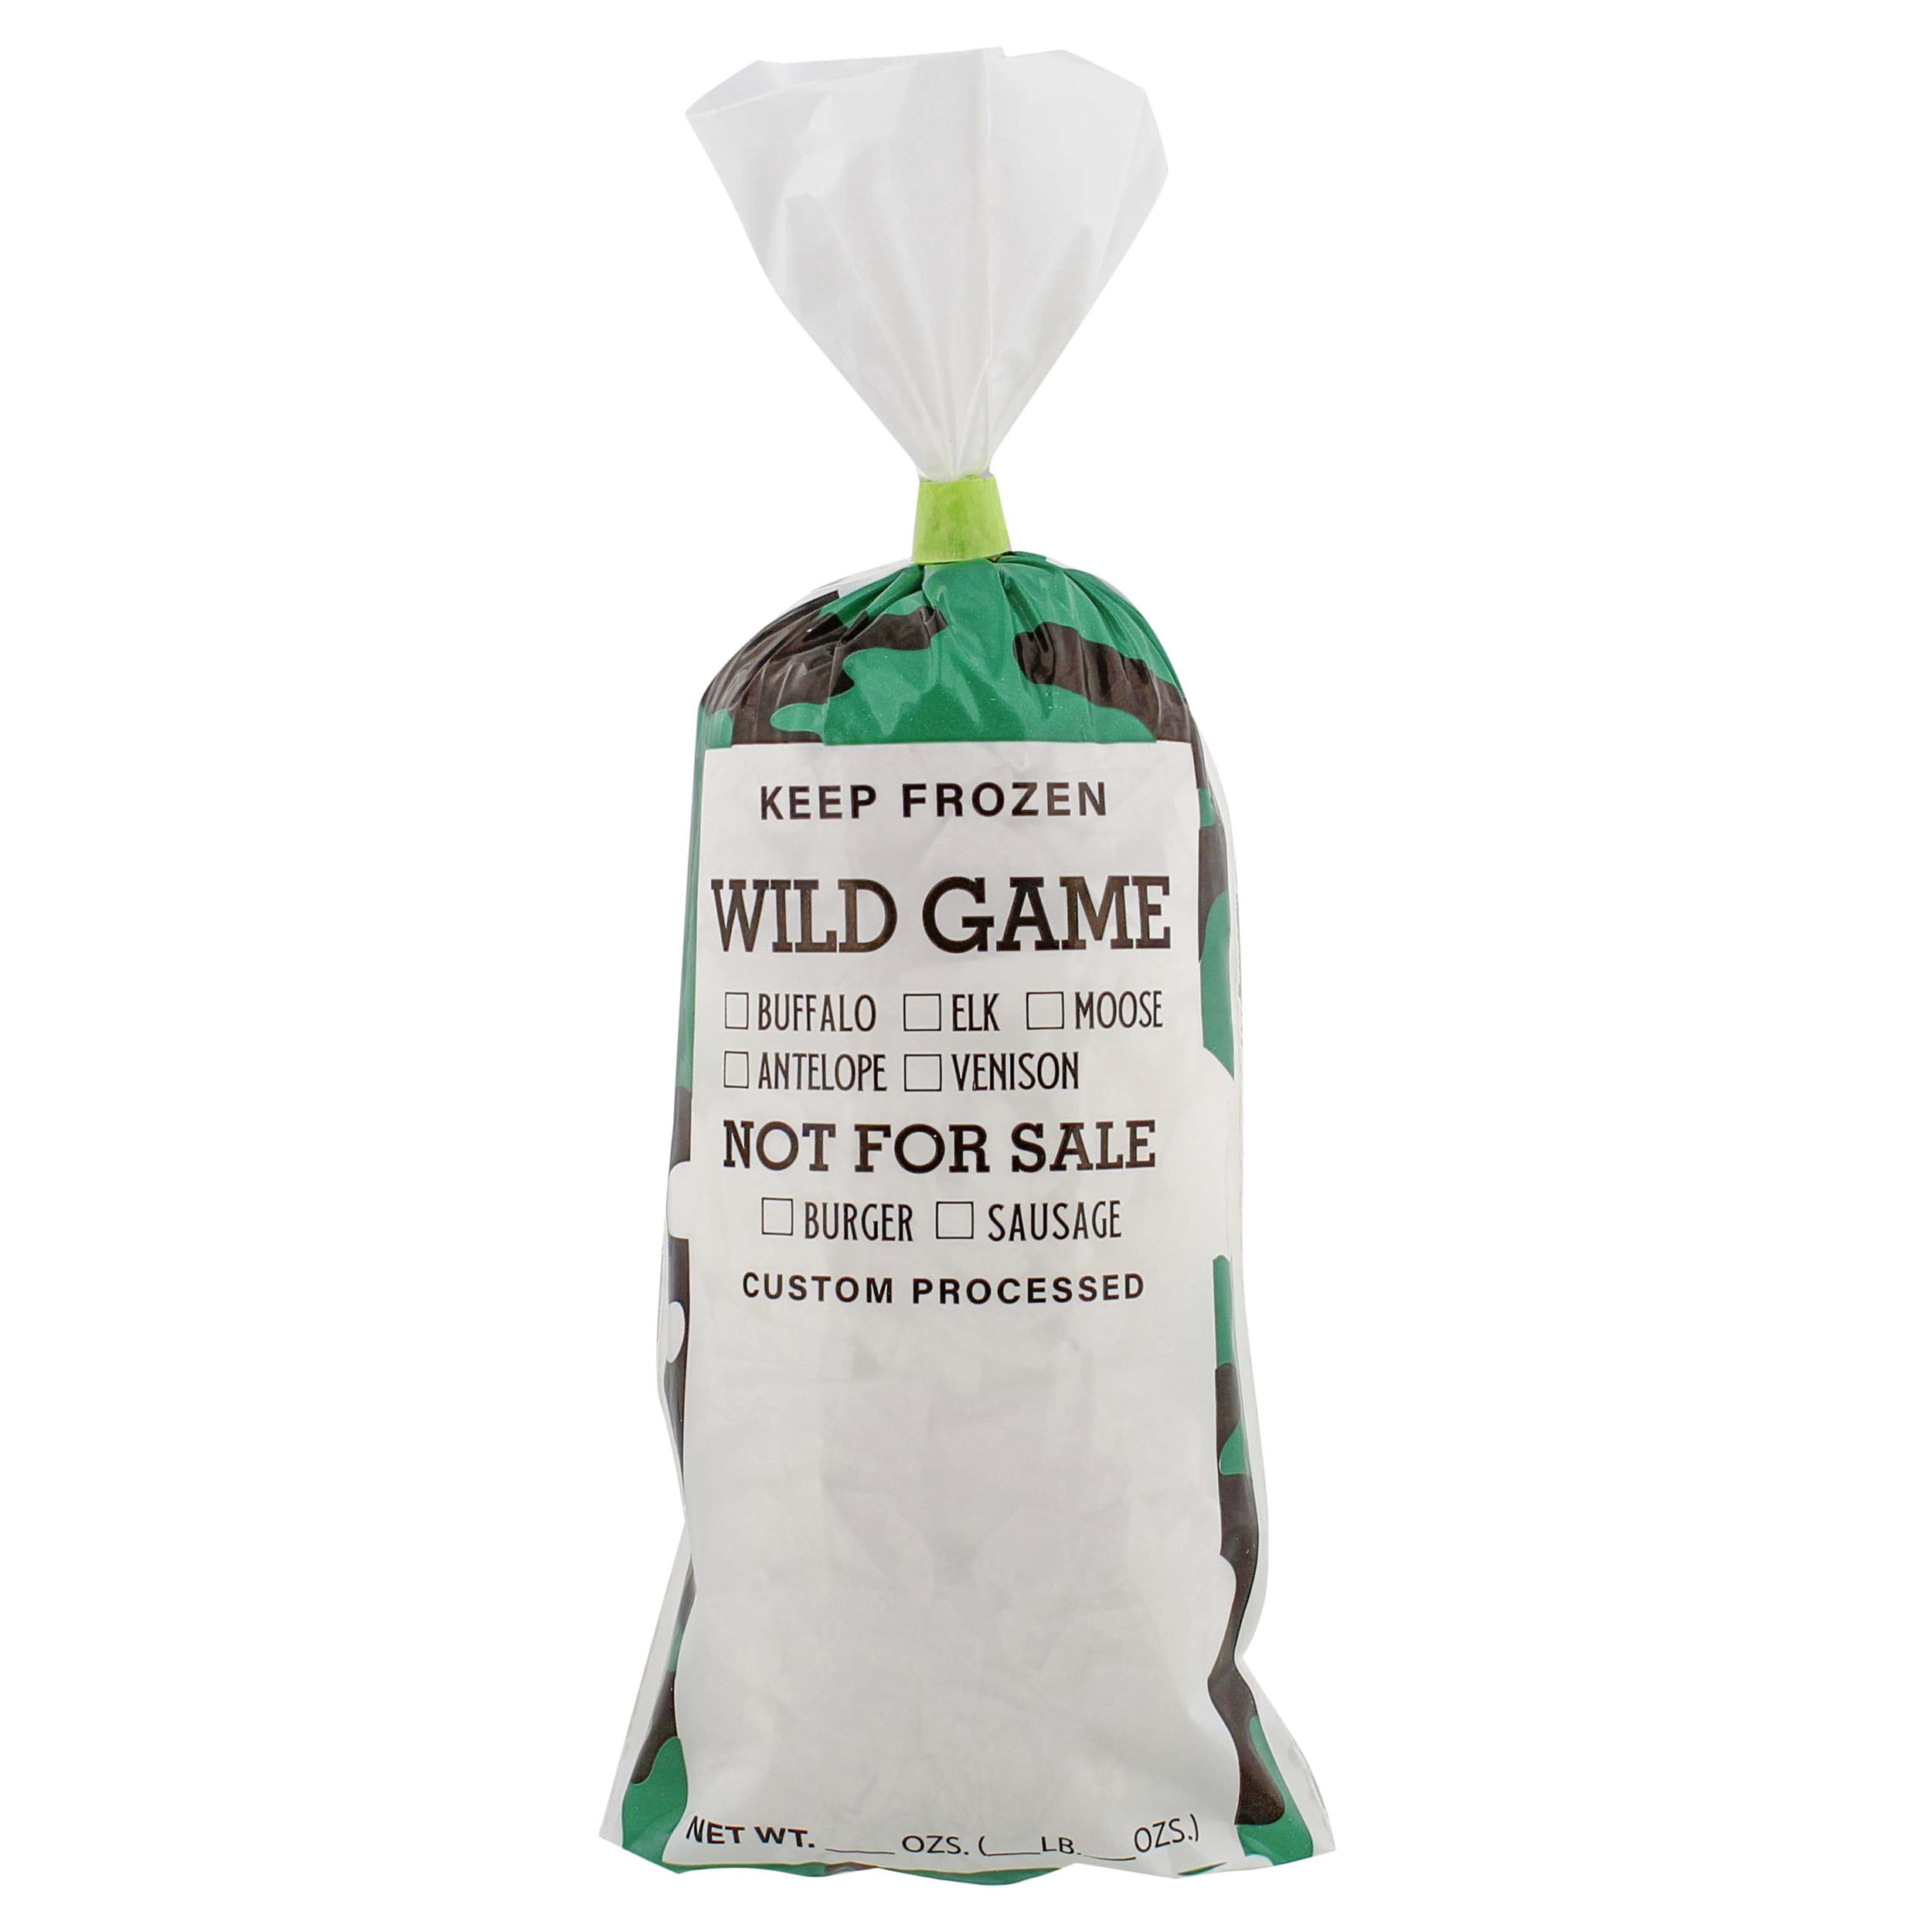 WILD GAME GROUND MEAT FREEZER CHUB BAGS 1LB 1000 COUNT